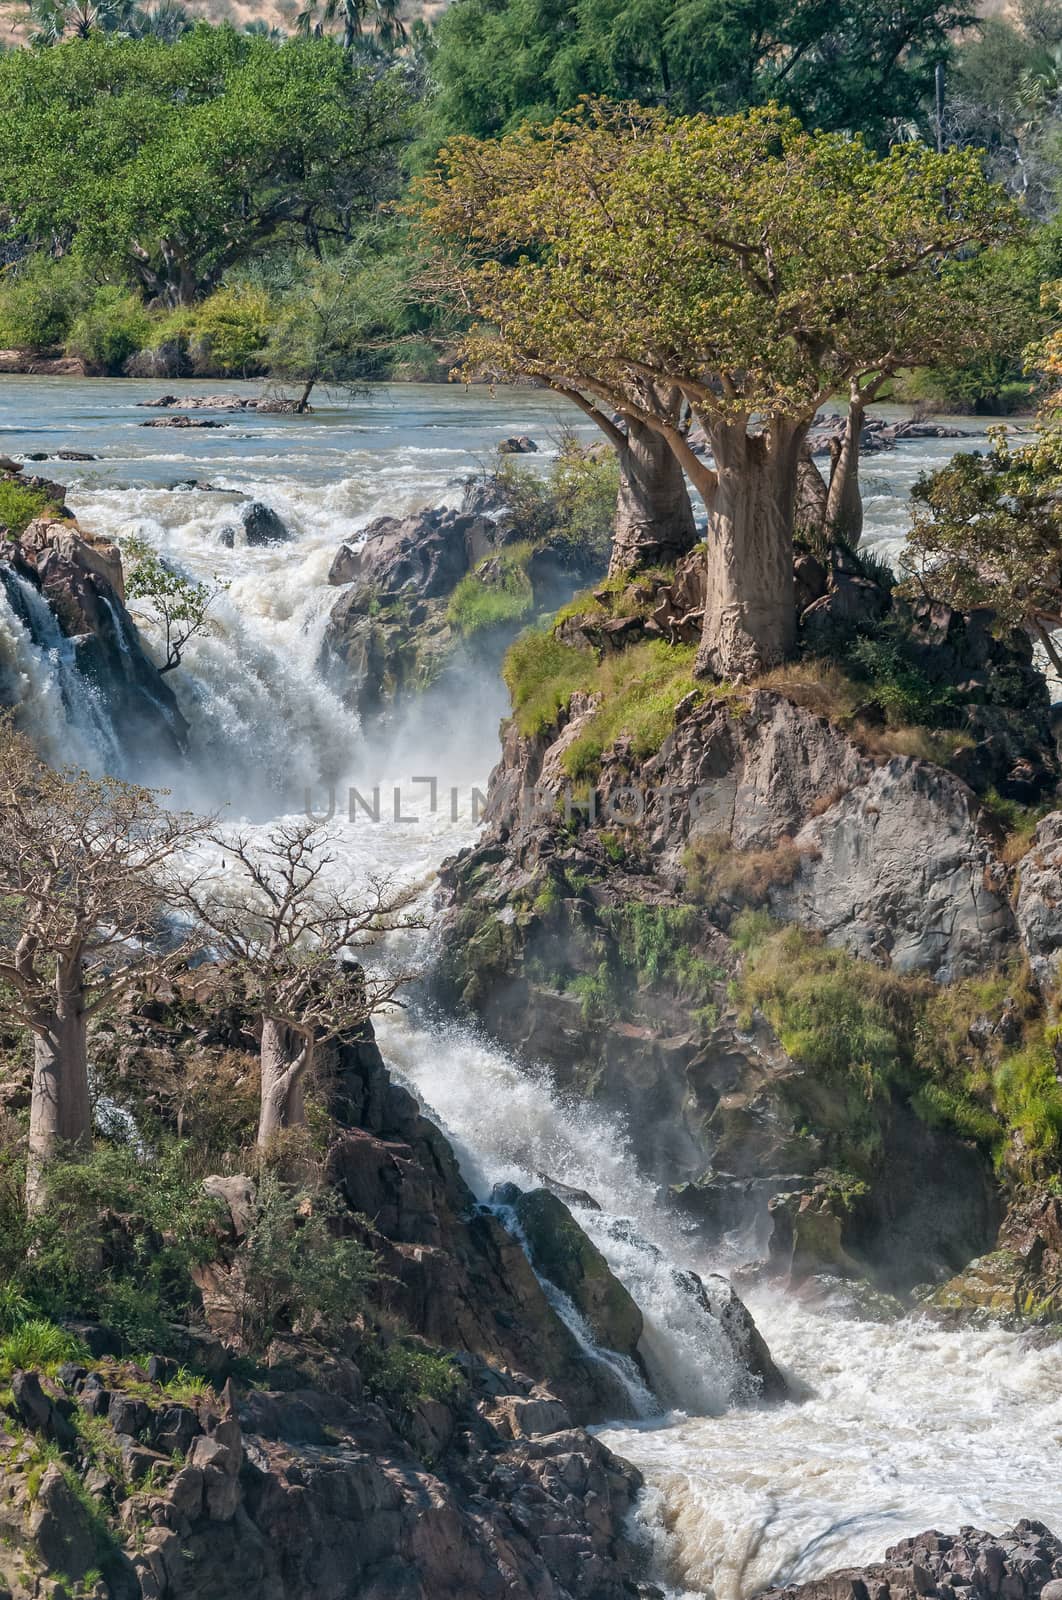 Part of the Epupa waterfalls in the Kunene River. Baobab trees are visible